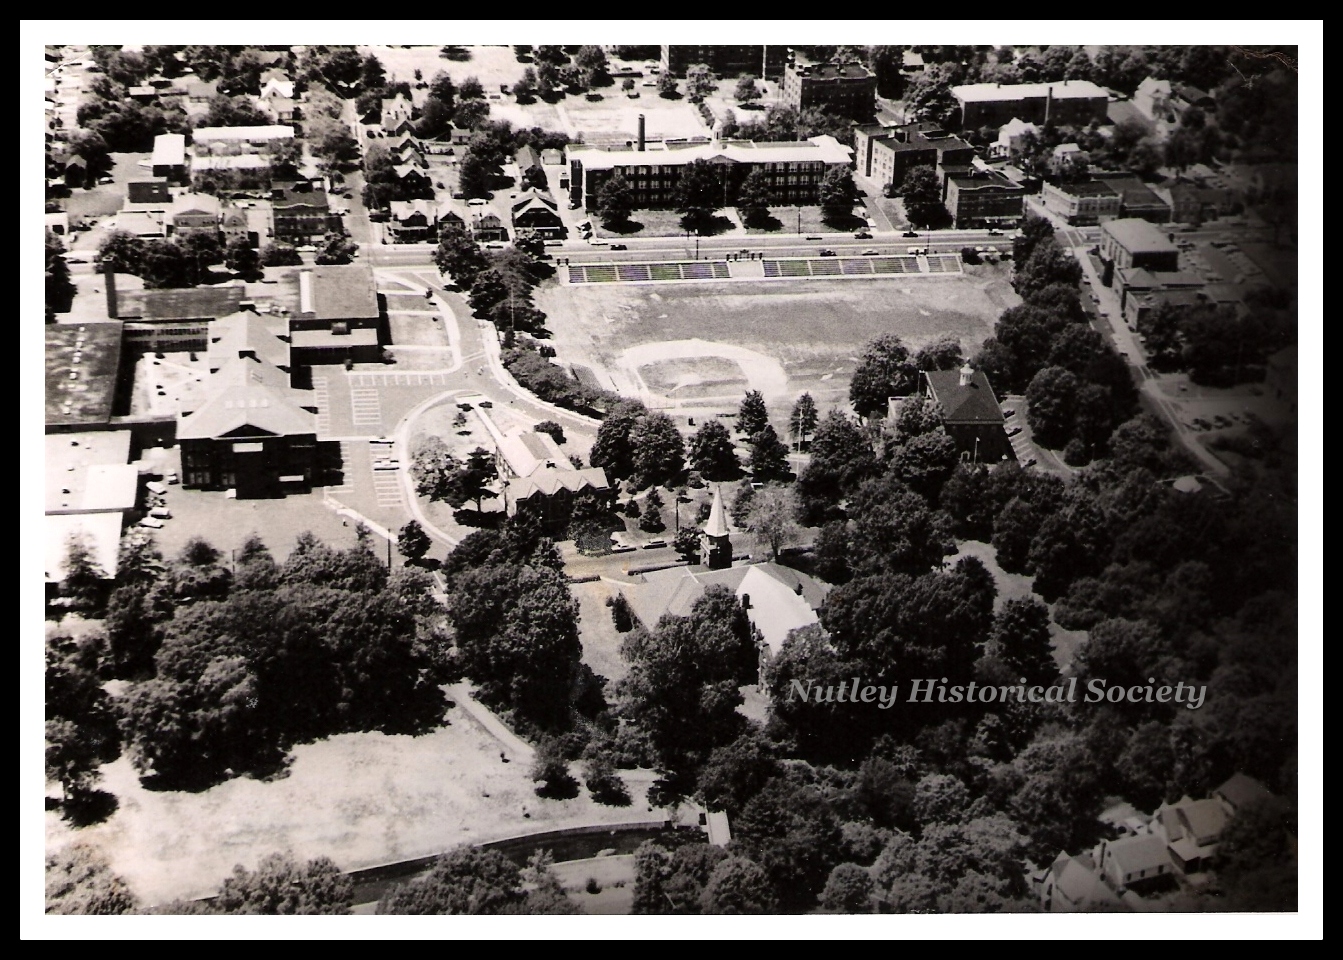 Nutley Historical Society photo collection: Nutley Park Oval, aerial view